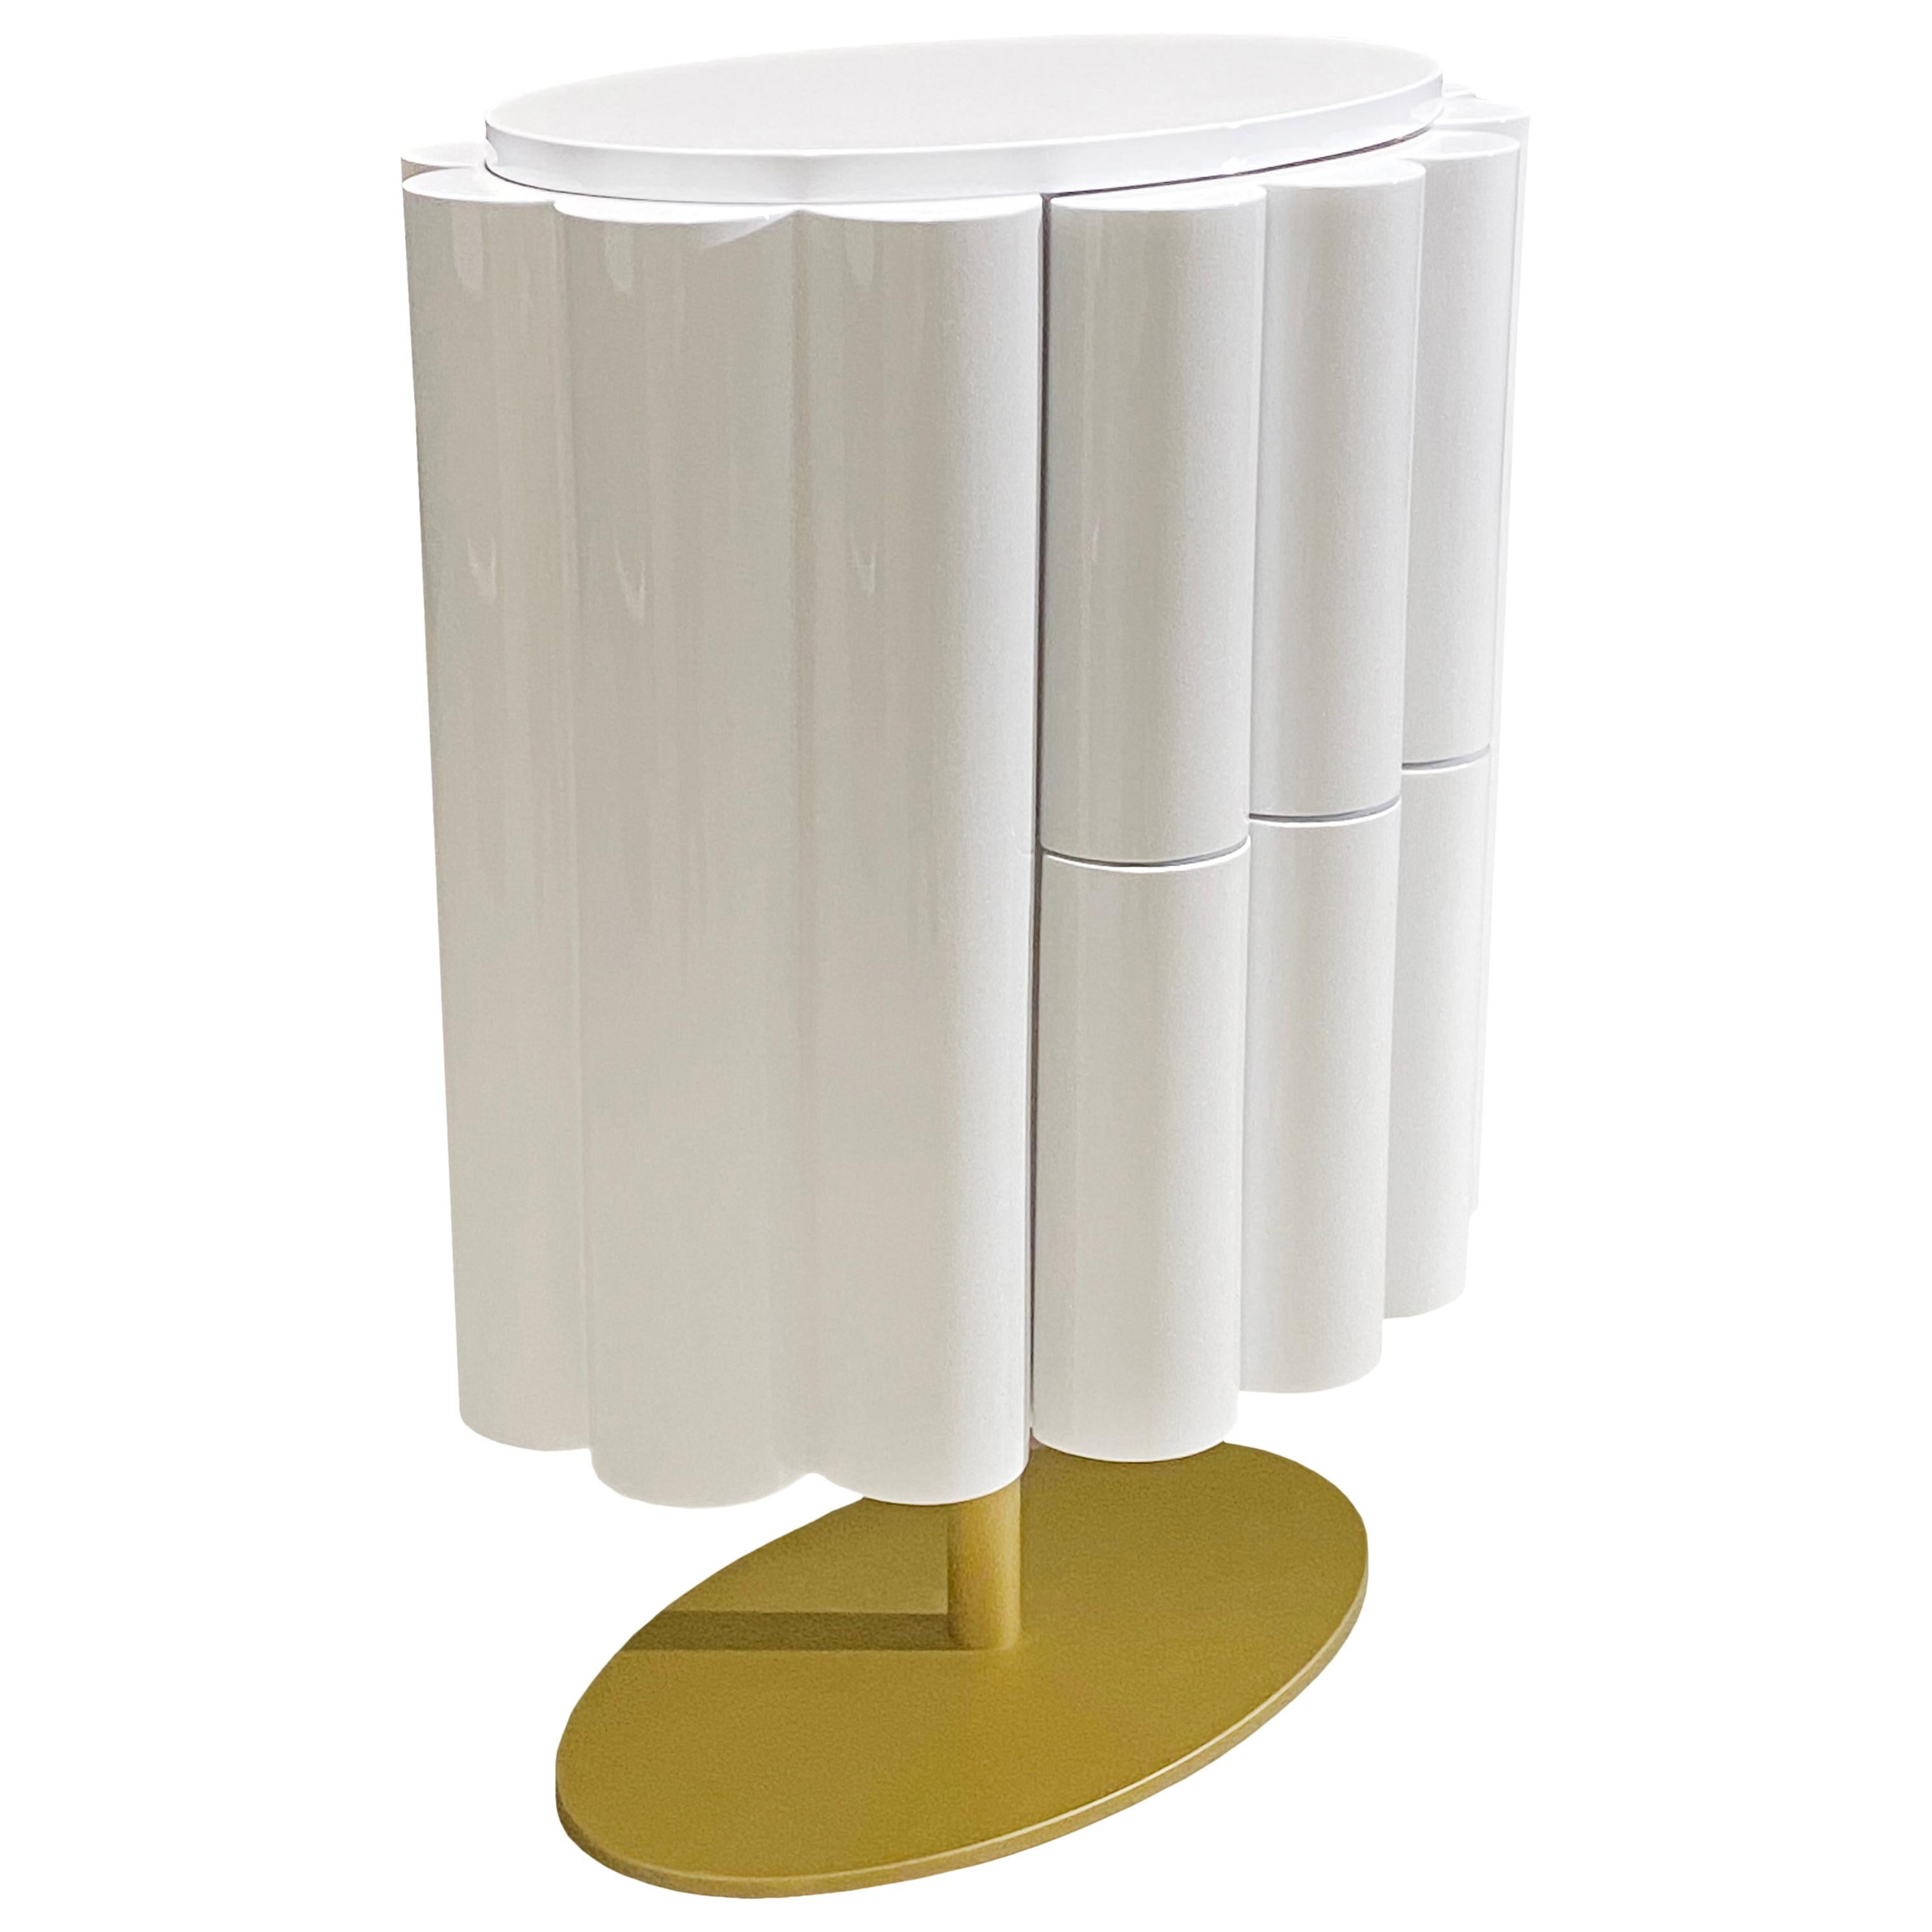 "Blossom" Modern Bedside Table in Glossy White from Egli Design